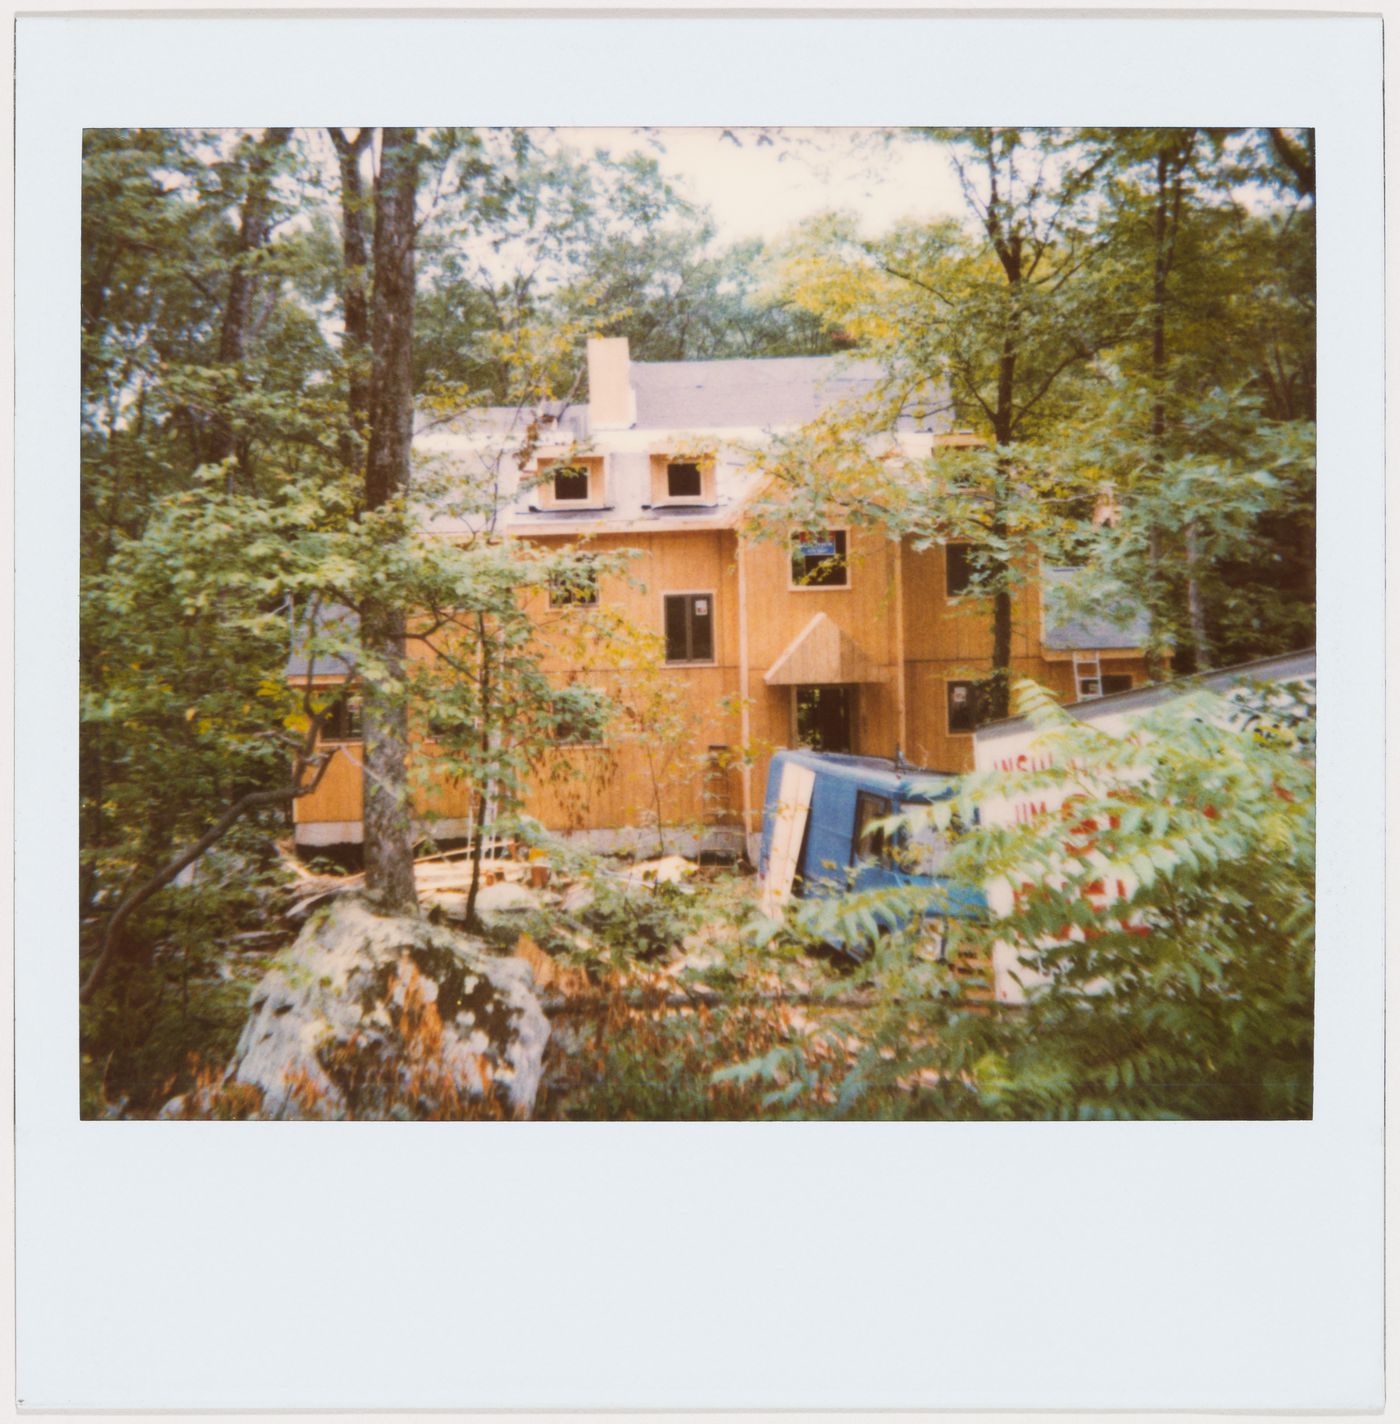 House on wooded property under construction